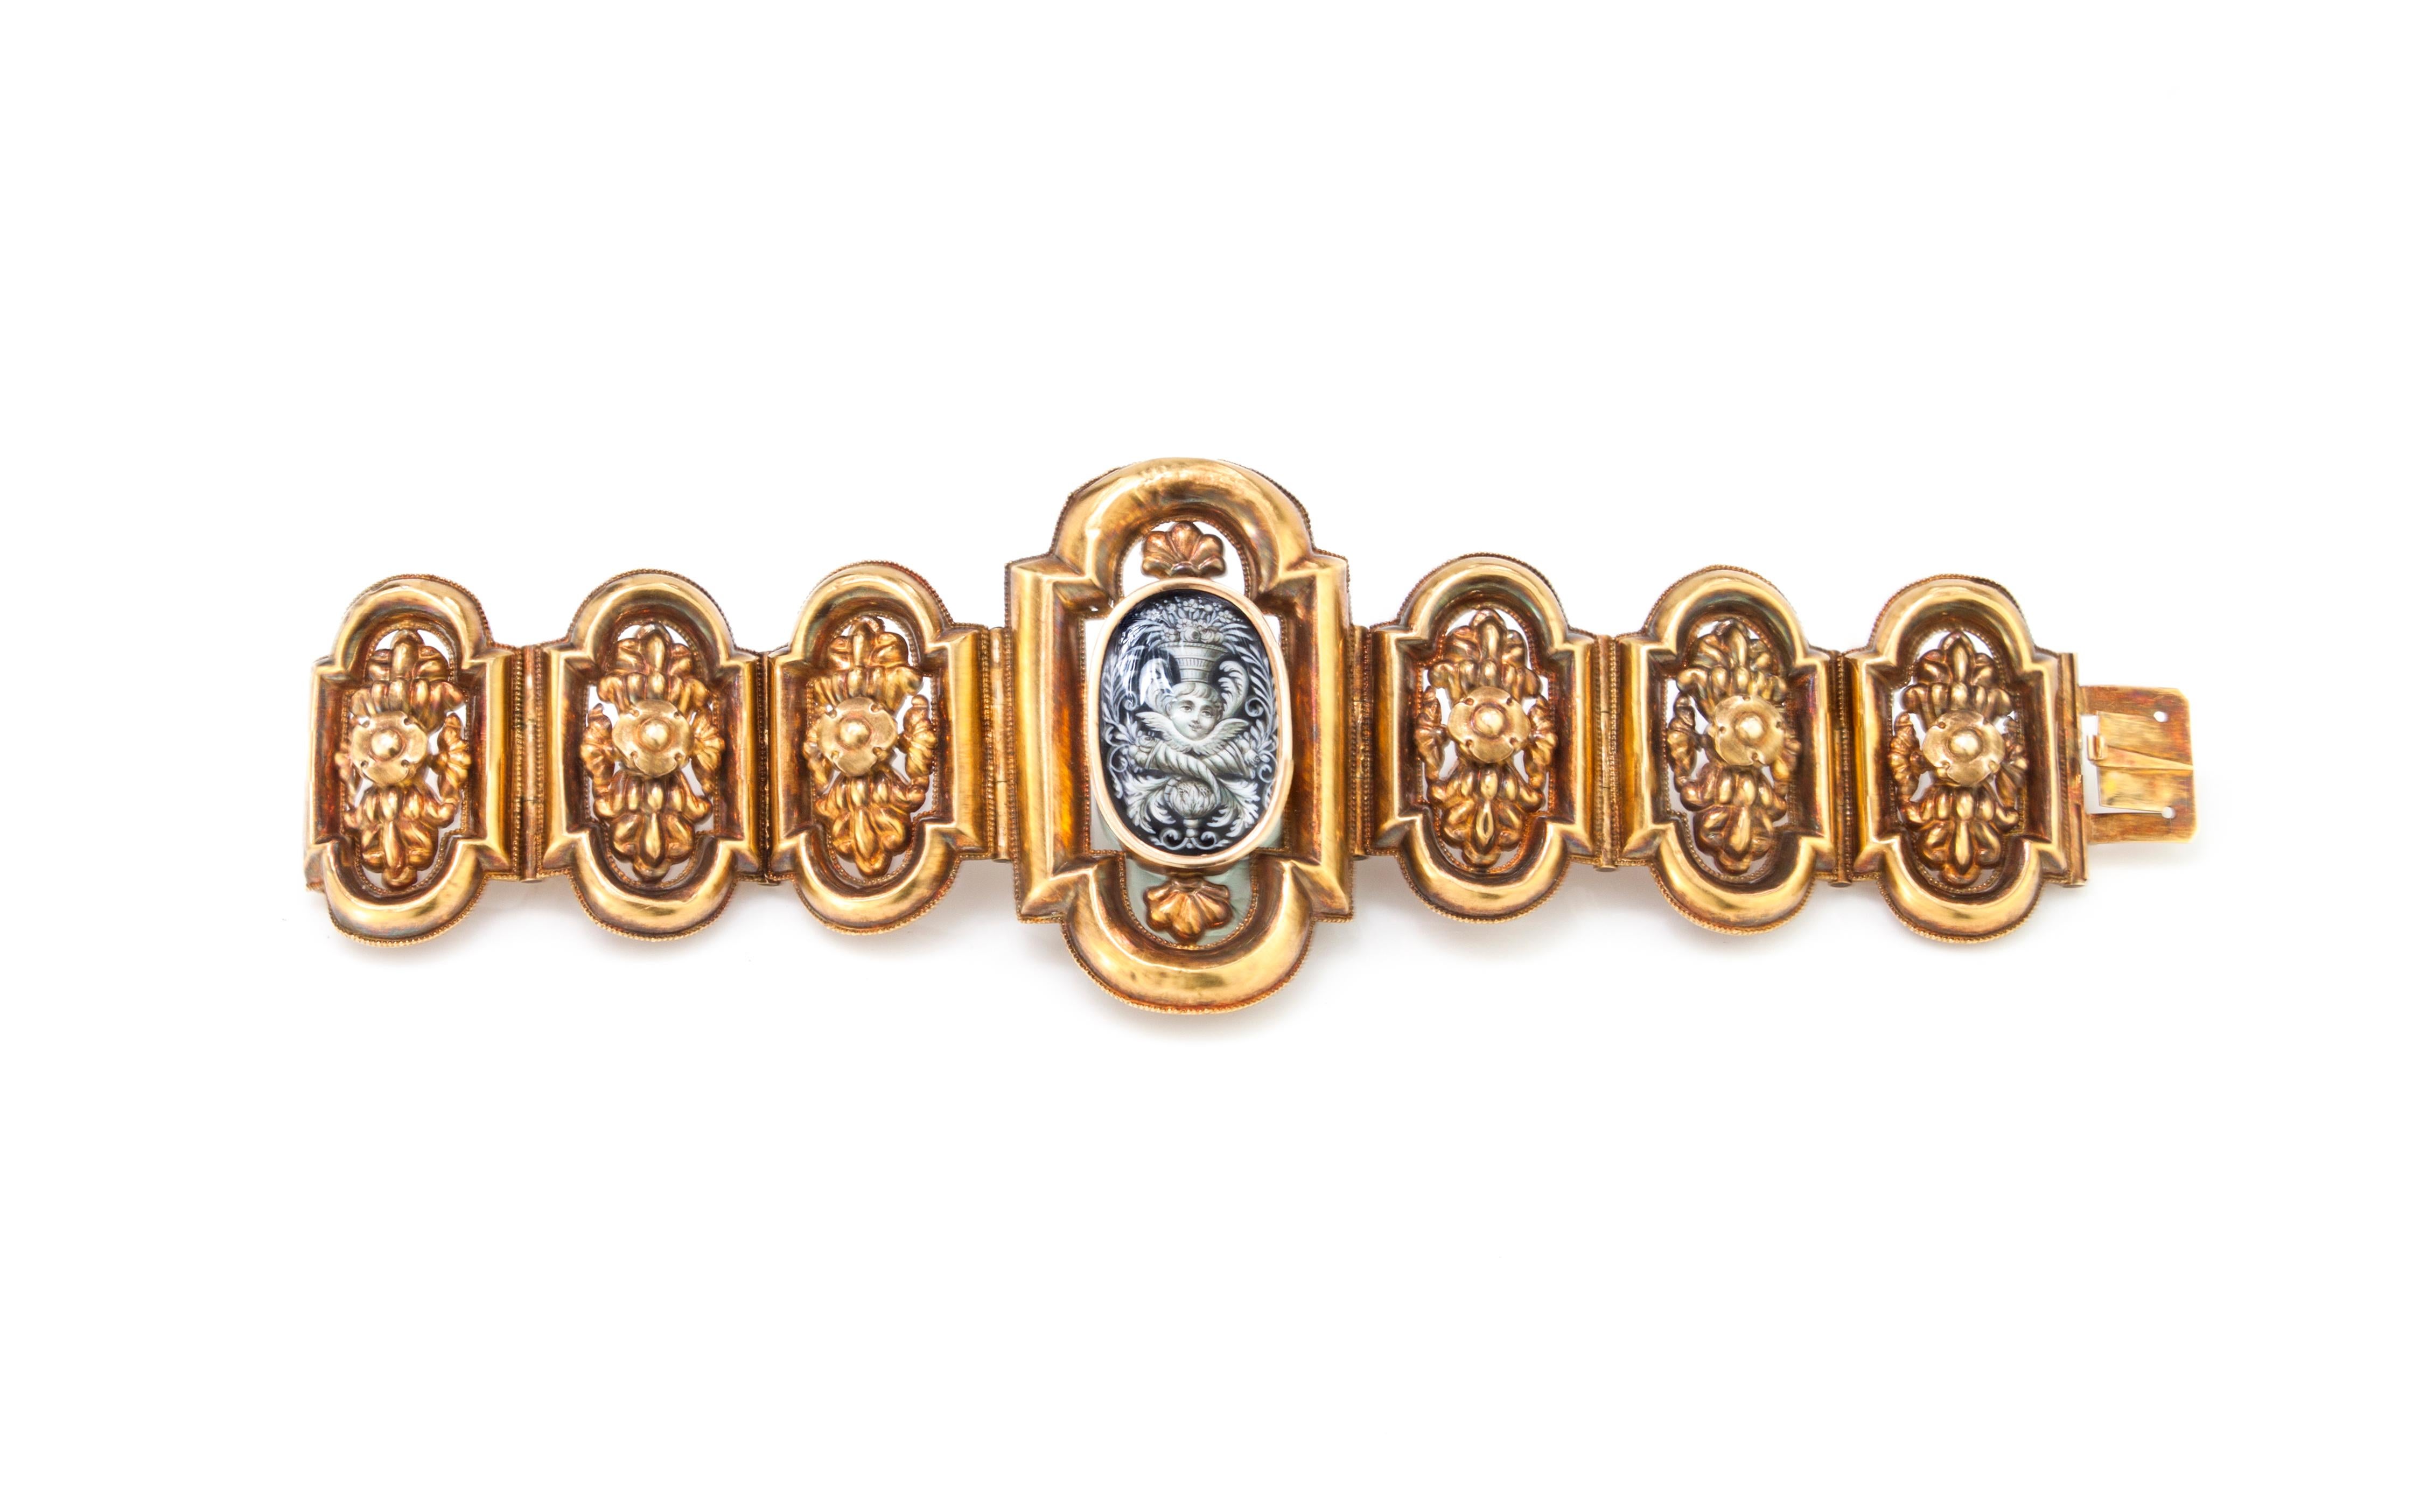 Antique 18kt yellow gold ladies bracelet, with enamel center depicting a putto.
Handmade in Italy, Circa 1870's
Tested positive for 18kt gold.

Dimensions -
Weight : 28 grams
Length x Width: 17 x 5.2 cm

Condition: Bracelet is has some age related